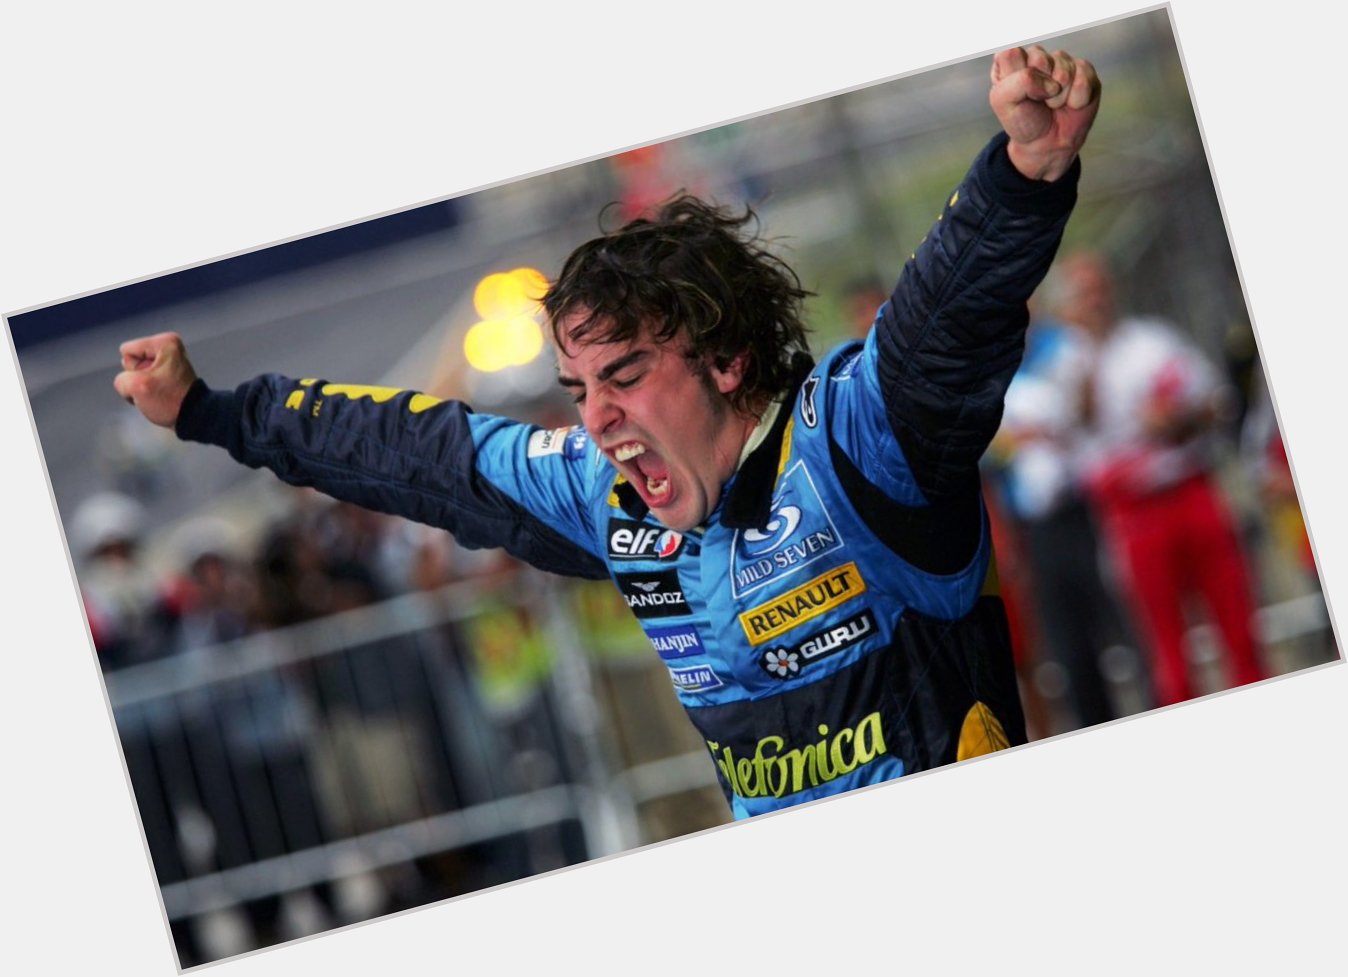 Fernando alonso s career in 4 pictures:

happy birthday, !!! may you have a great race weekend! 